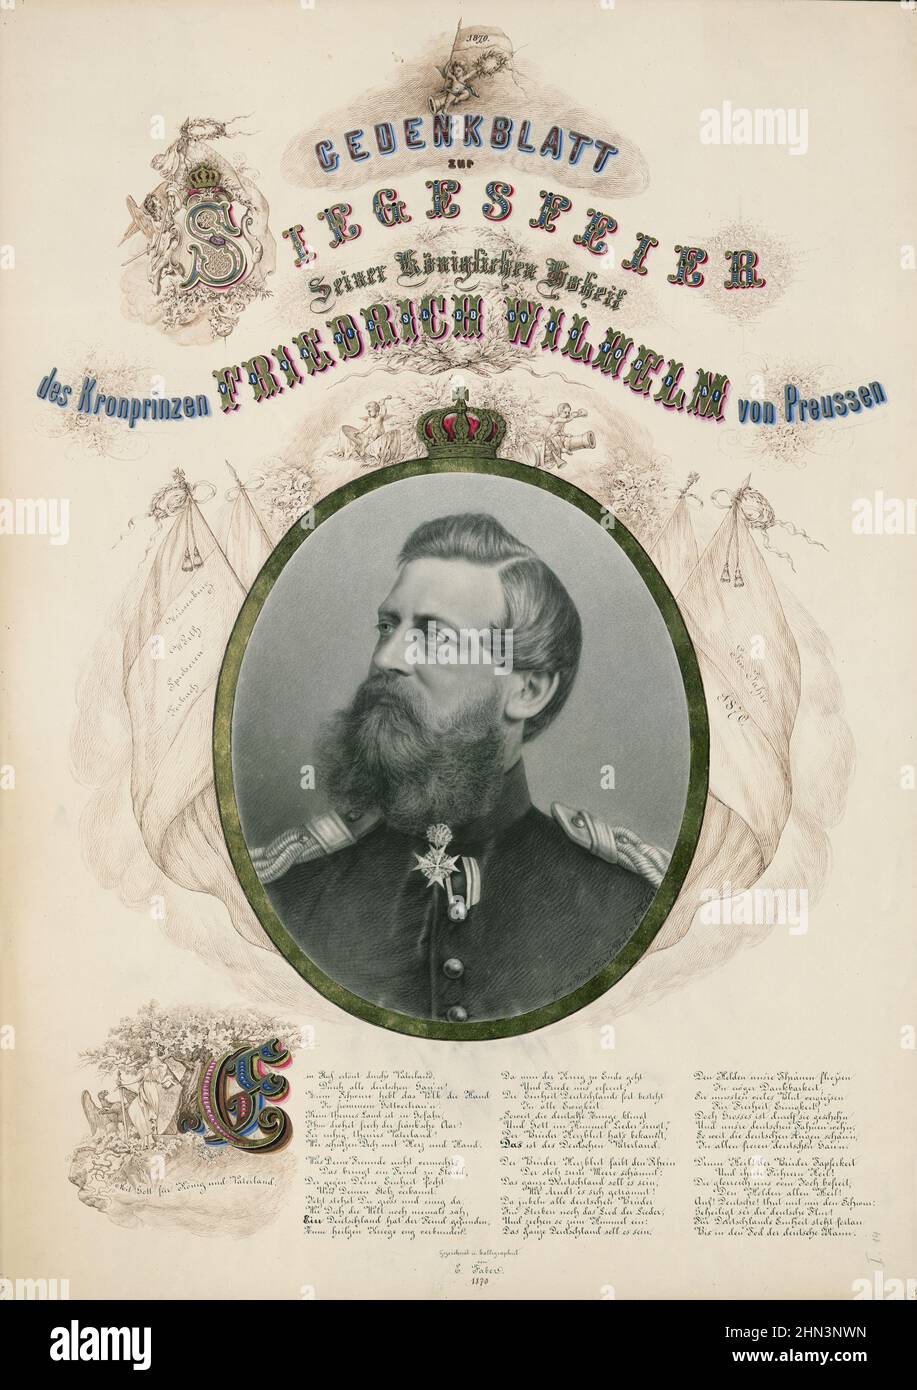 Commemorative sheet for the victory Celebration of His Royal Highness, Crown Prince Friedrich Wilhelm of Prussia : Vivat! Long live Victoria! 1870 Fre Stock Photo